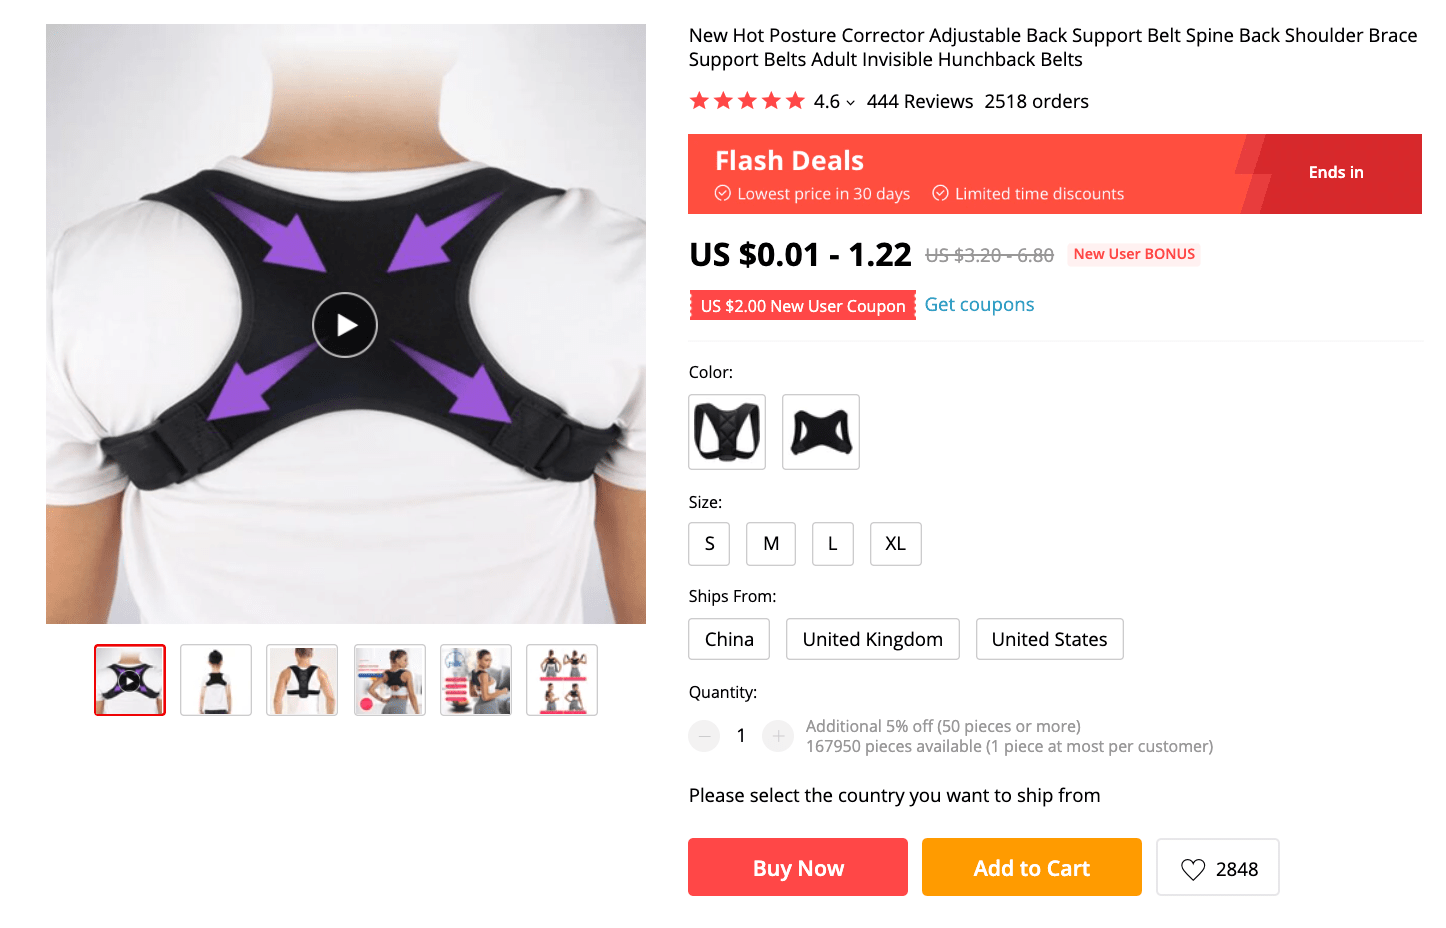 Useful things to buy right now: a posture corrector